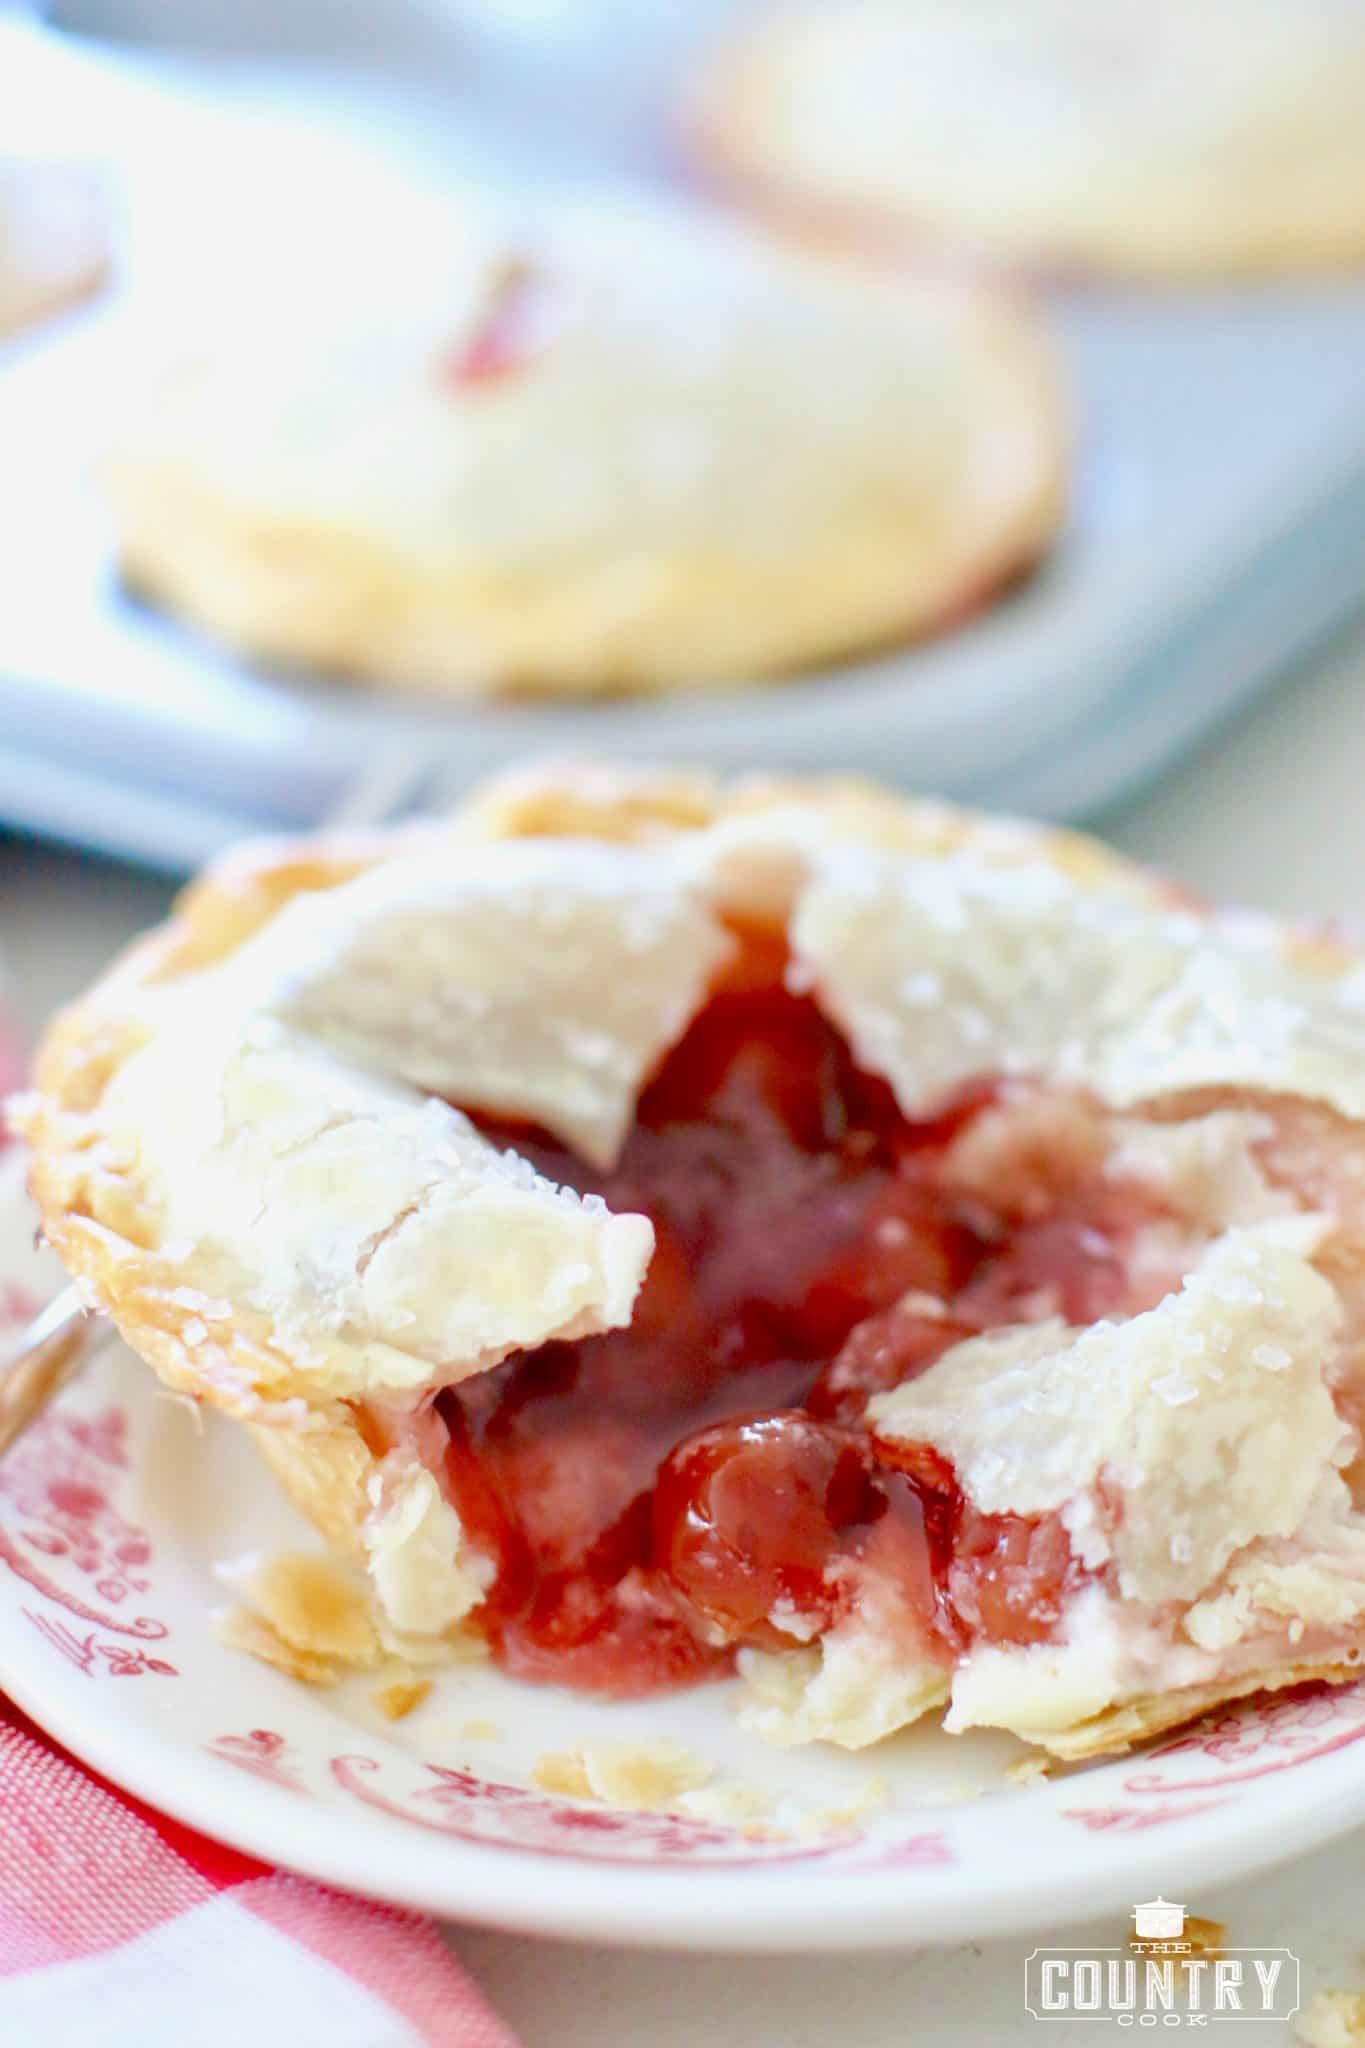 a mini cherry pie on a plate and the pie has been opened to show the filling.